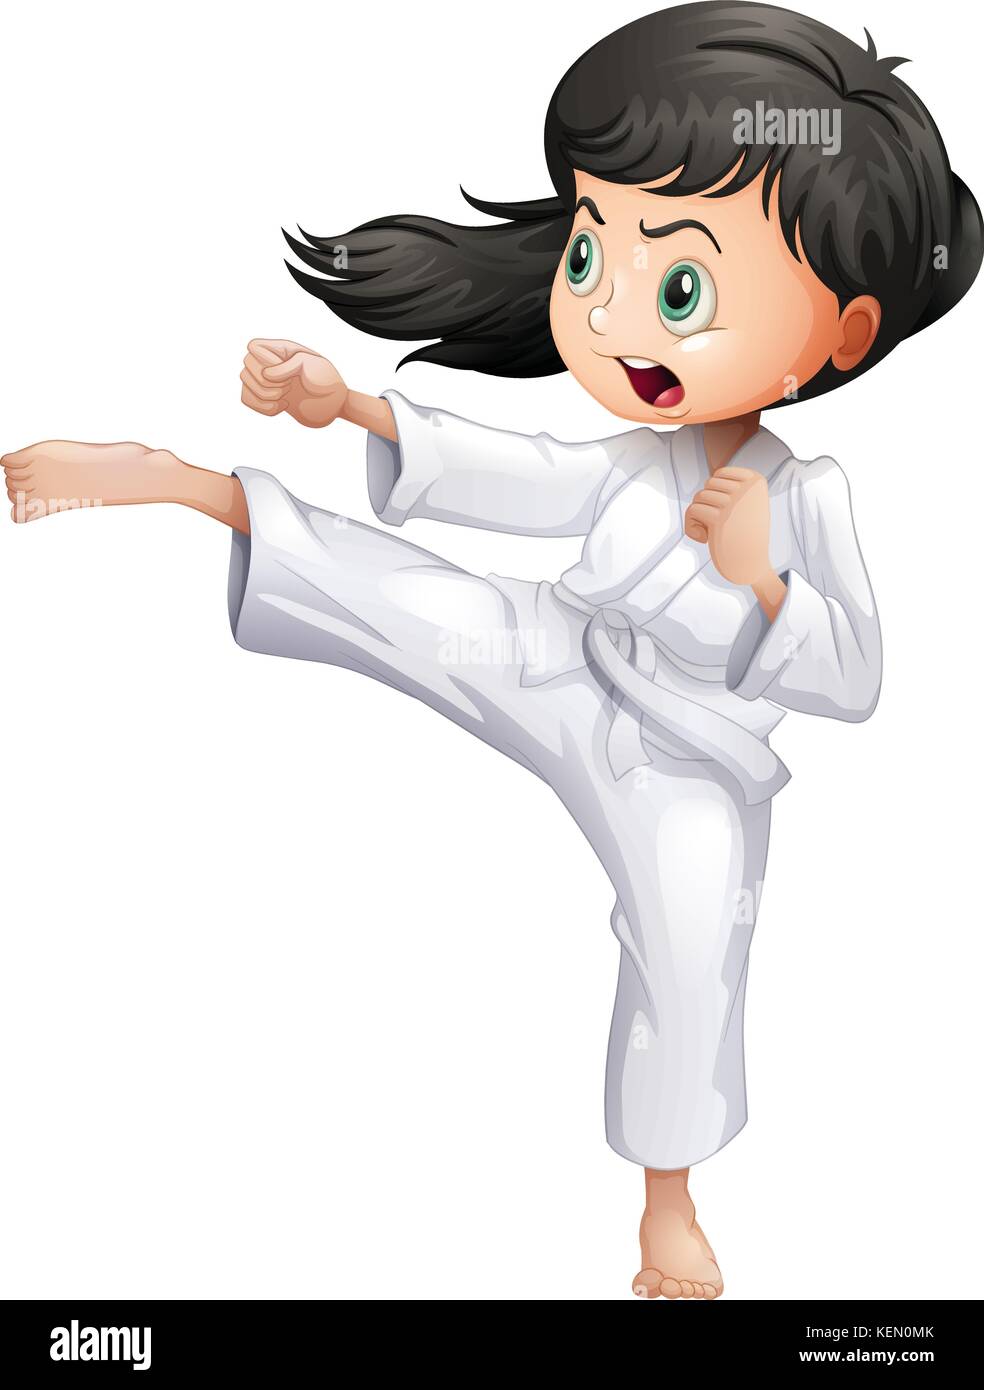 Illustration of a young woman doing karate on a white background Stock Vector